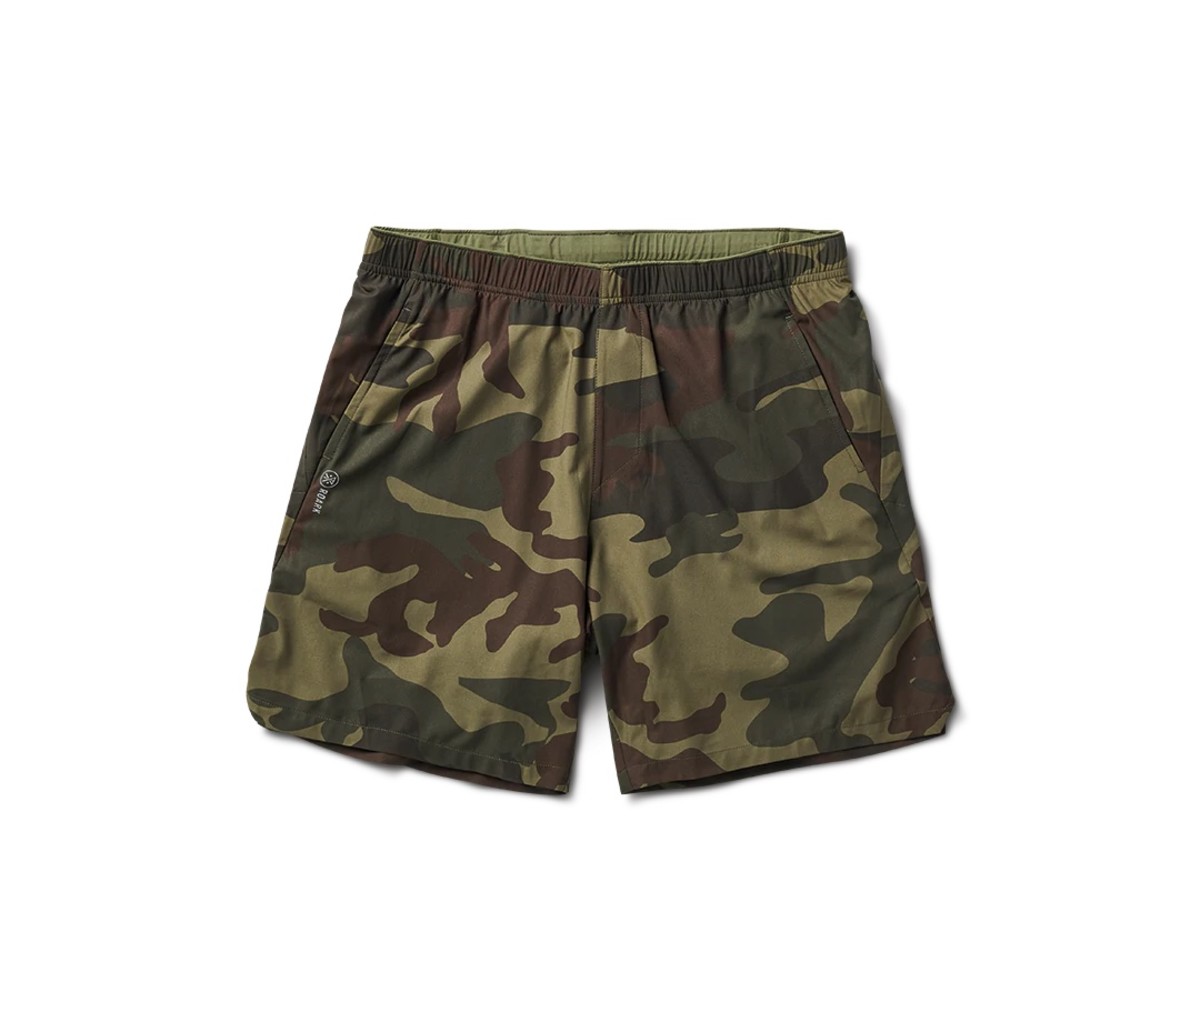 Run swift and true with the Roark Bommer Running Shorts.